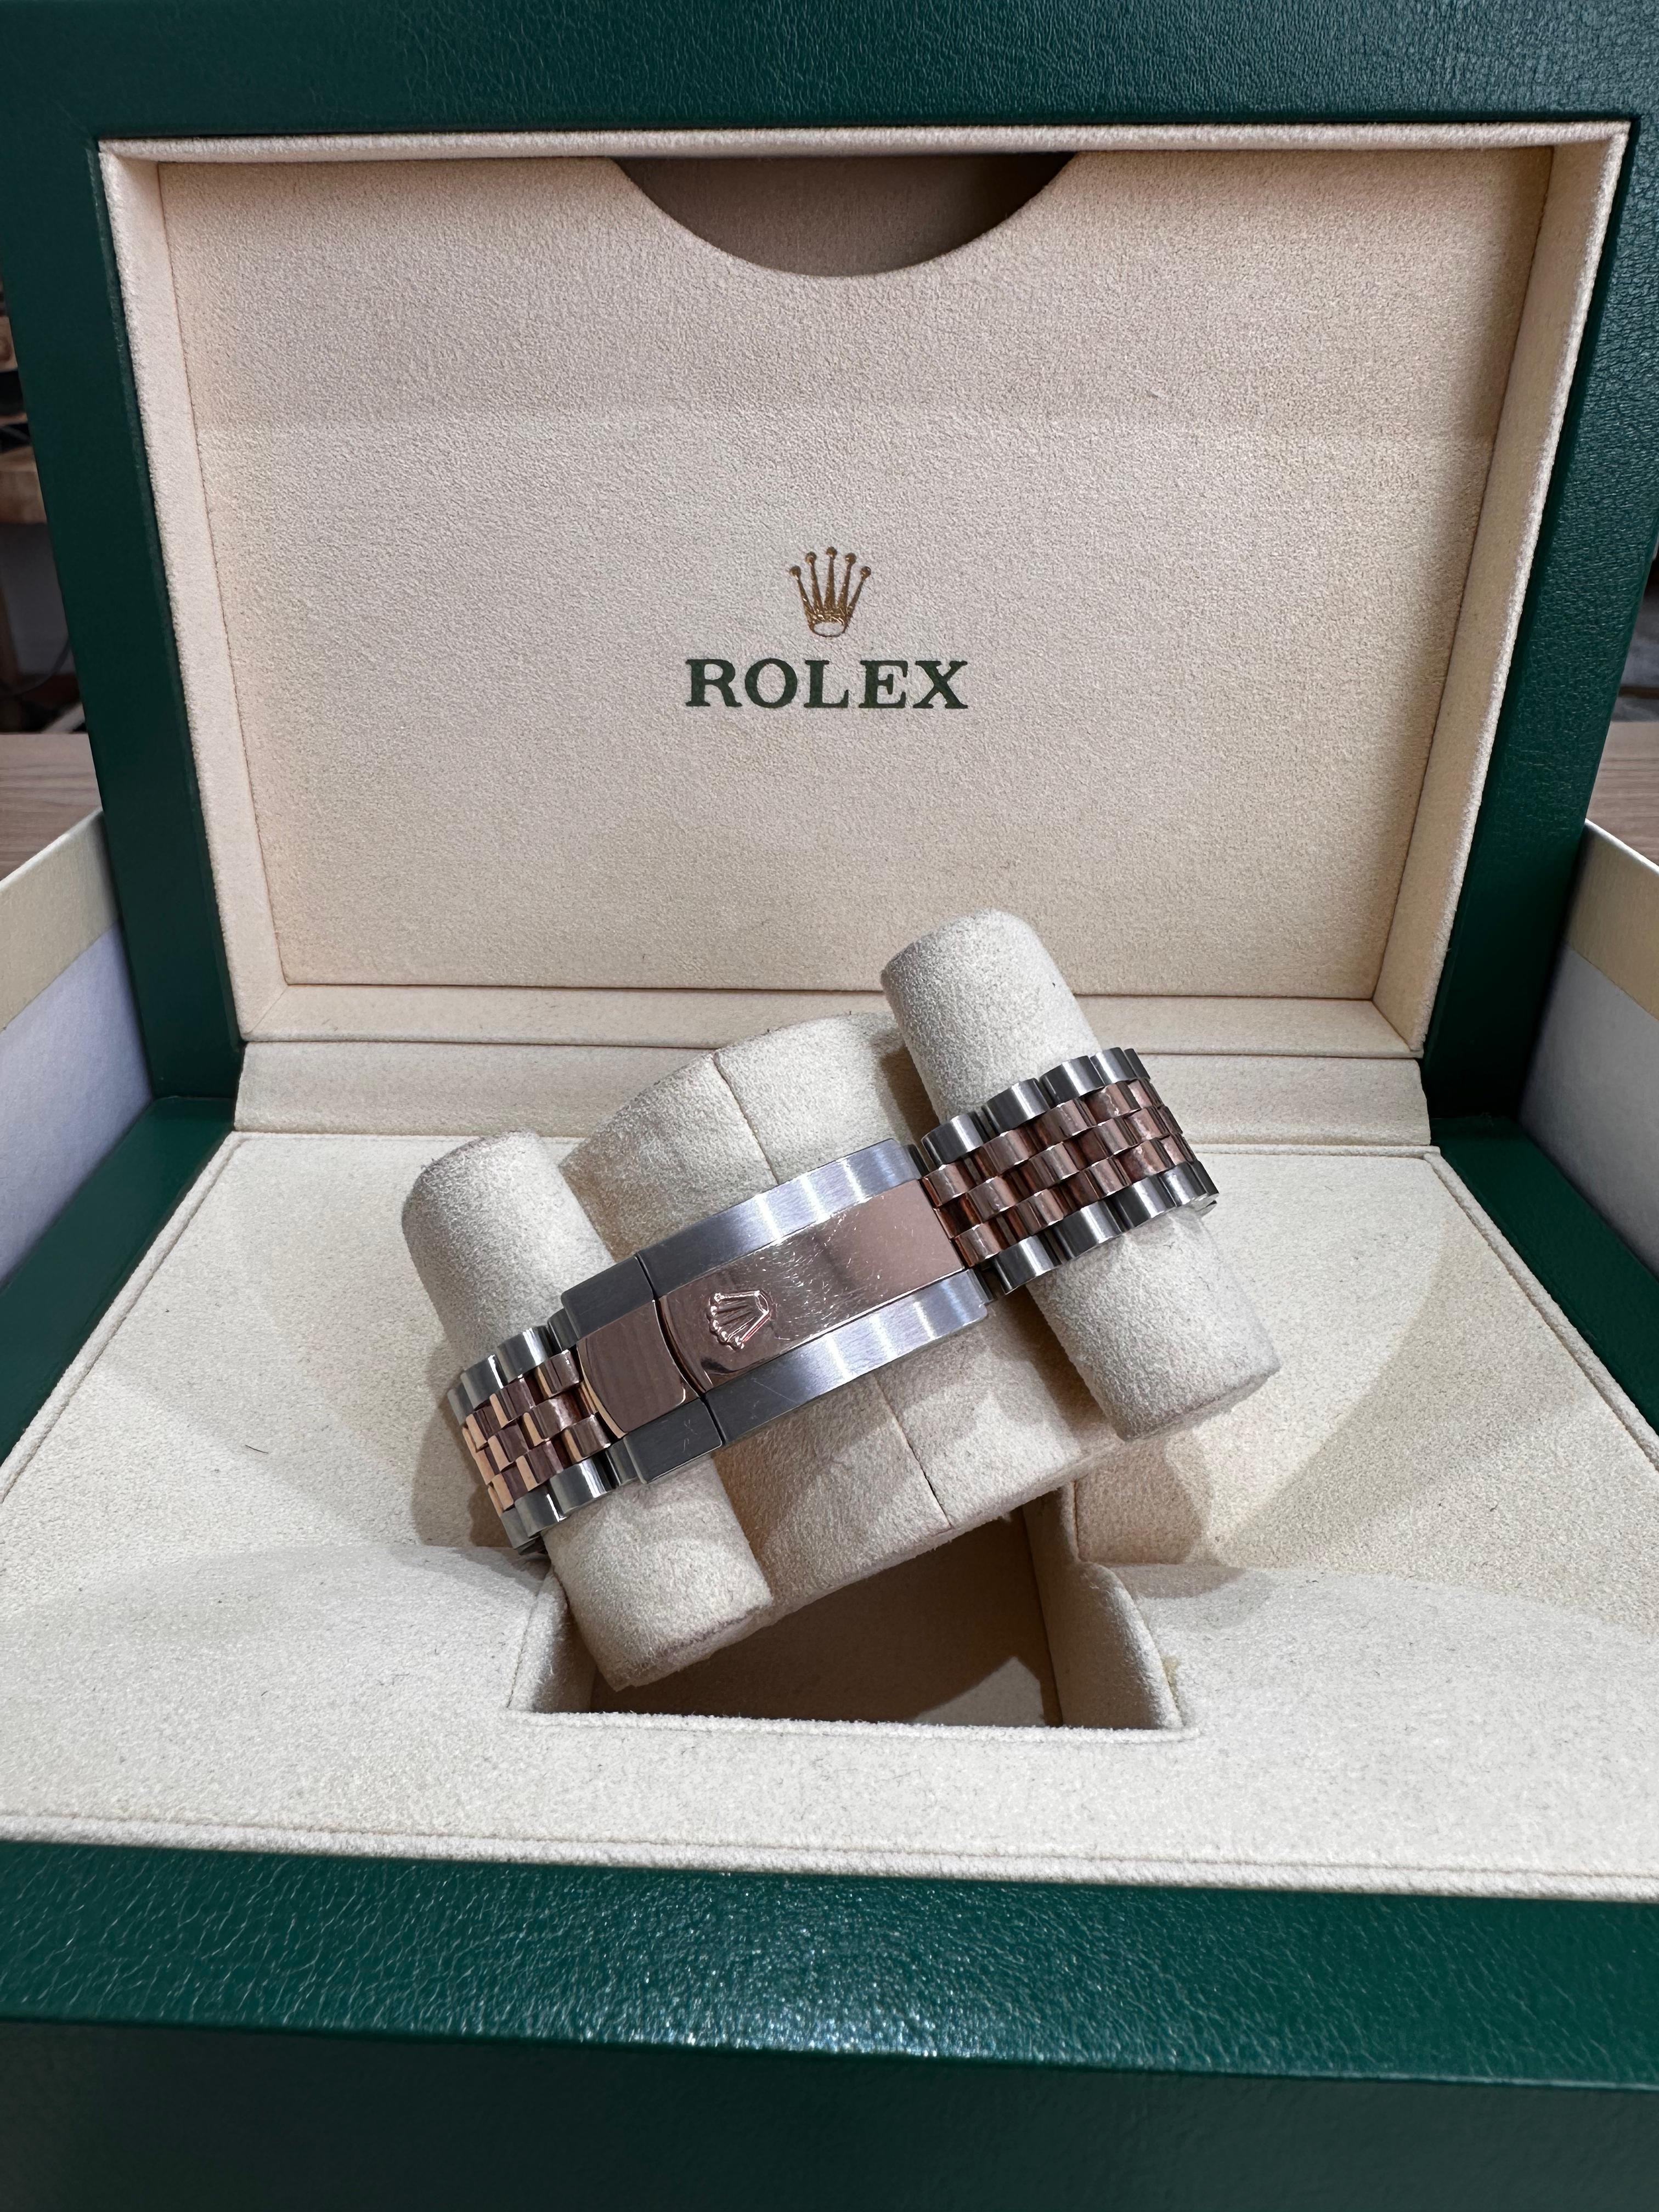 2019 Rolex Datejust 41 Two Tone Rose Gold Fluted Bezel Jubilee Bracelet With Chocolate Index Marker Dial